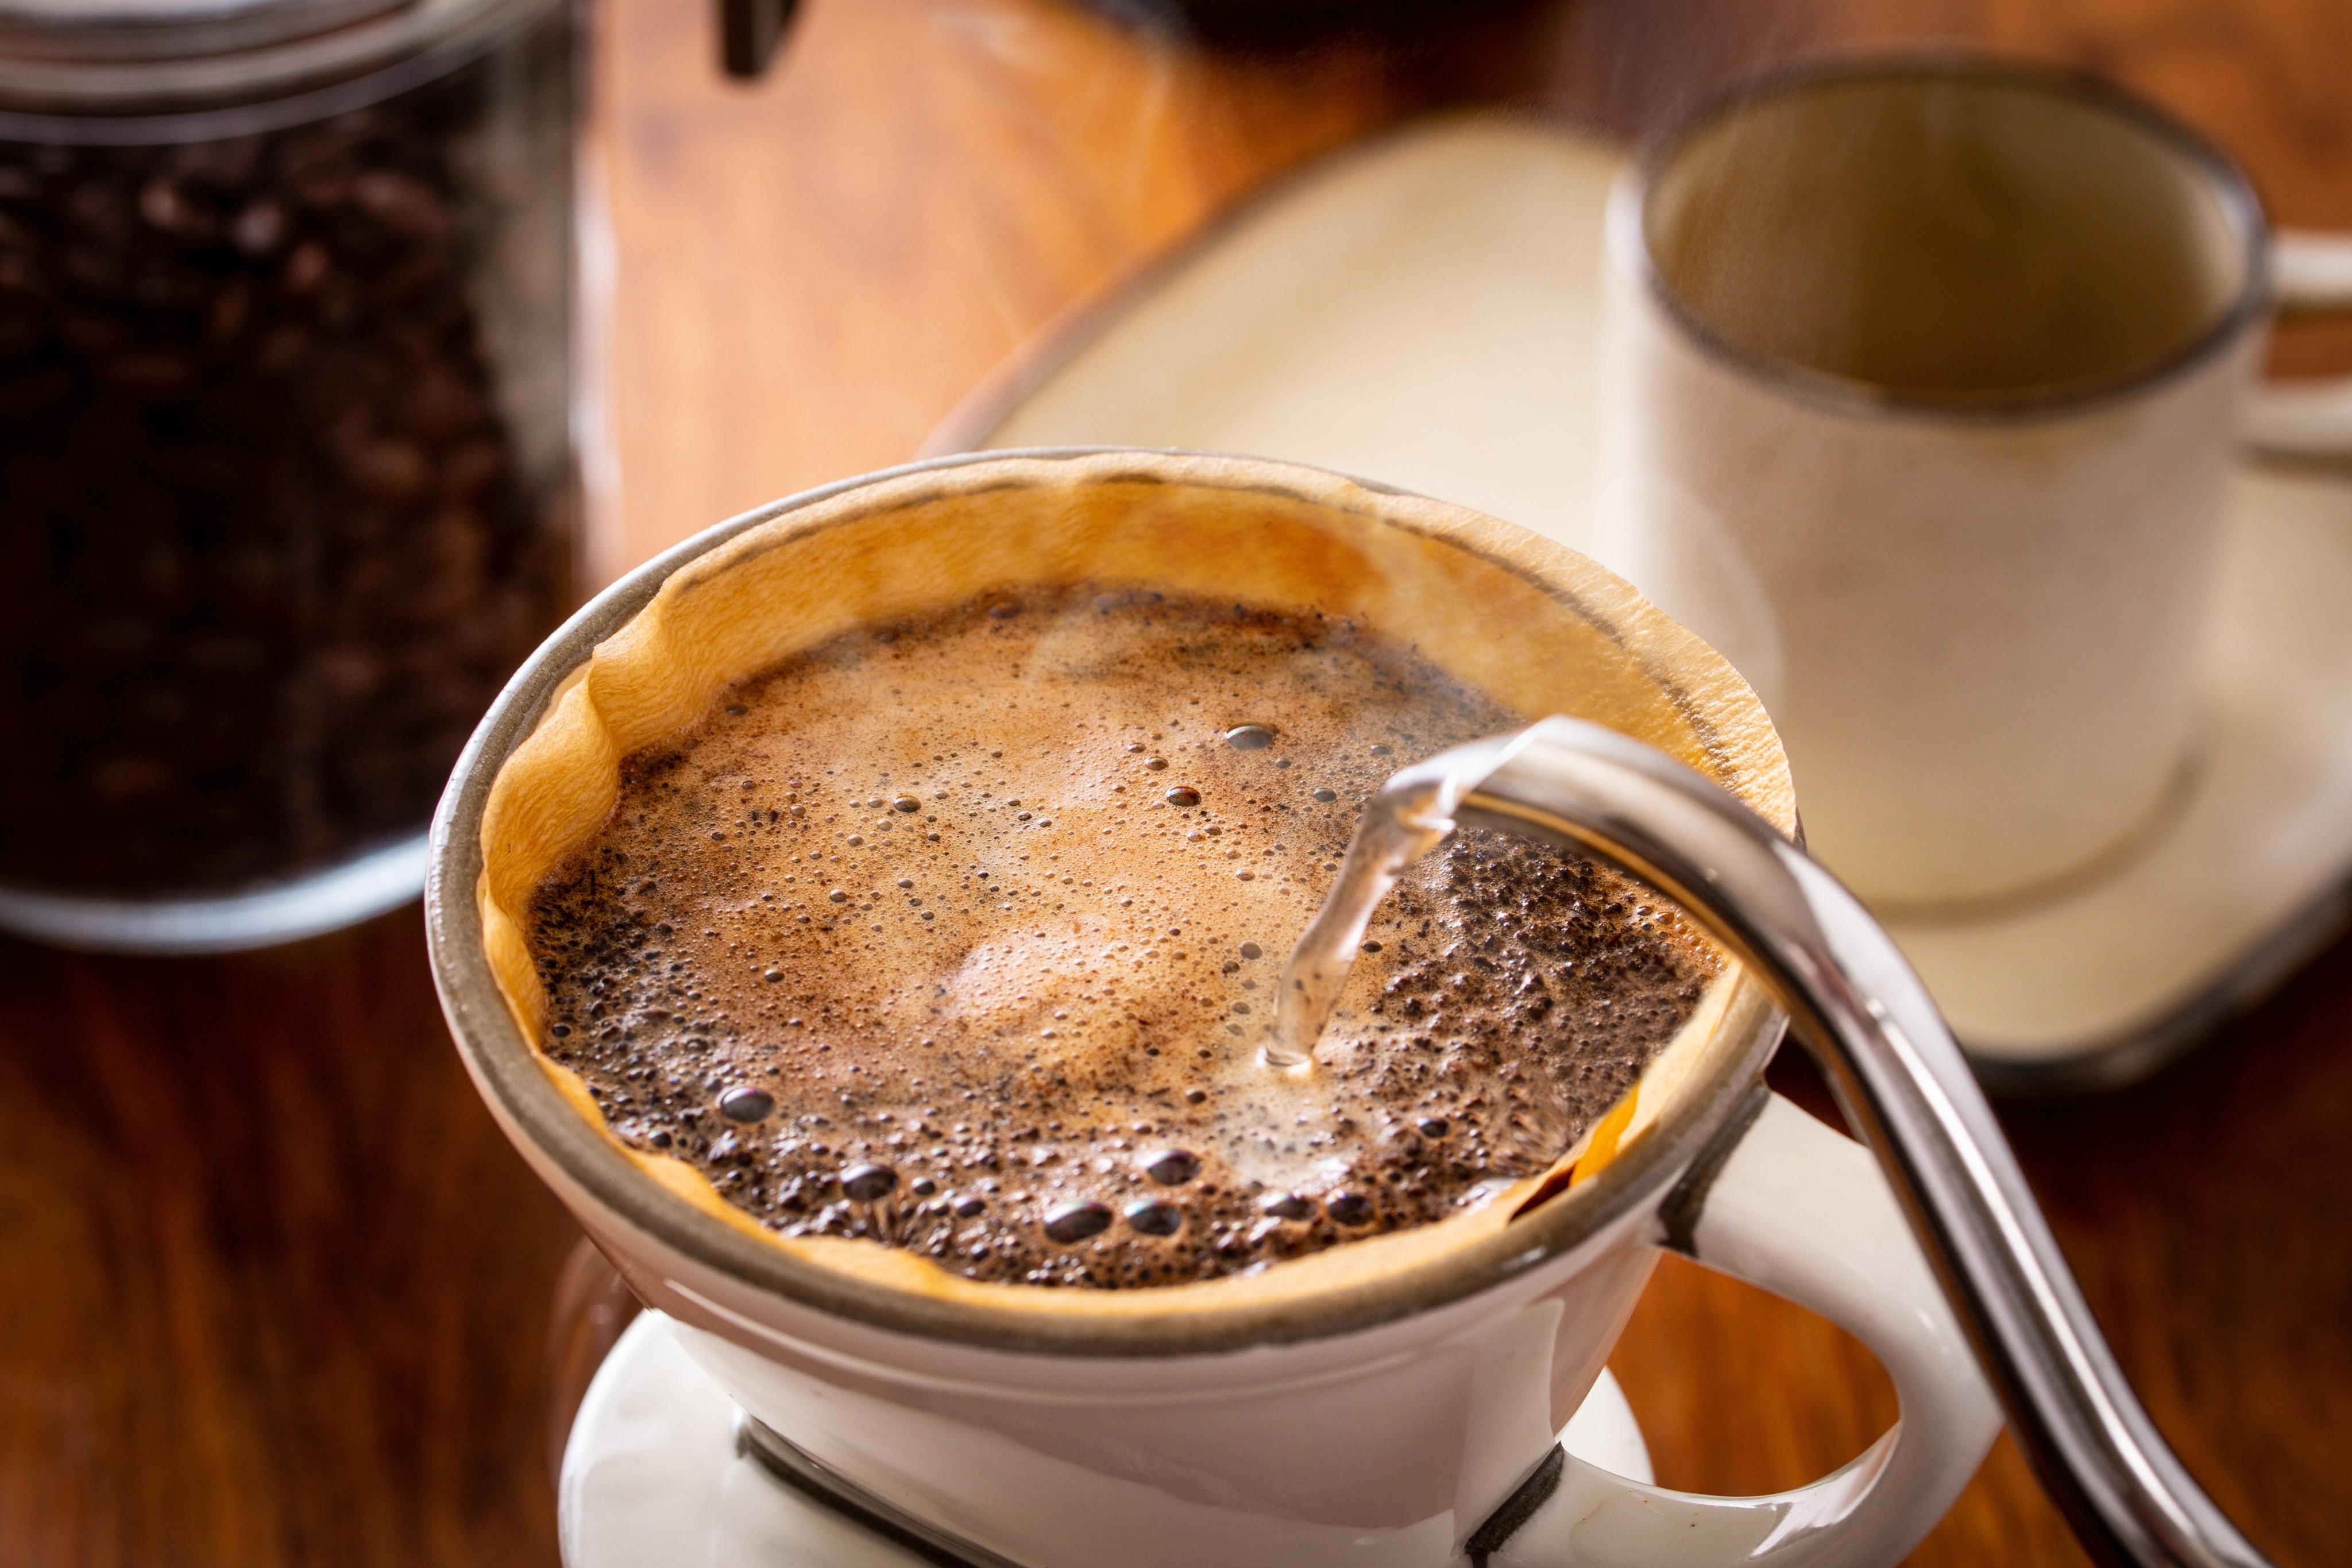 brew drip coffee on the table. Photo: Shutterstock Images